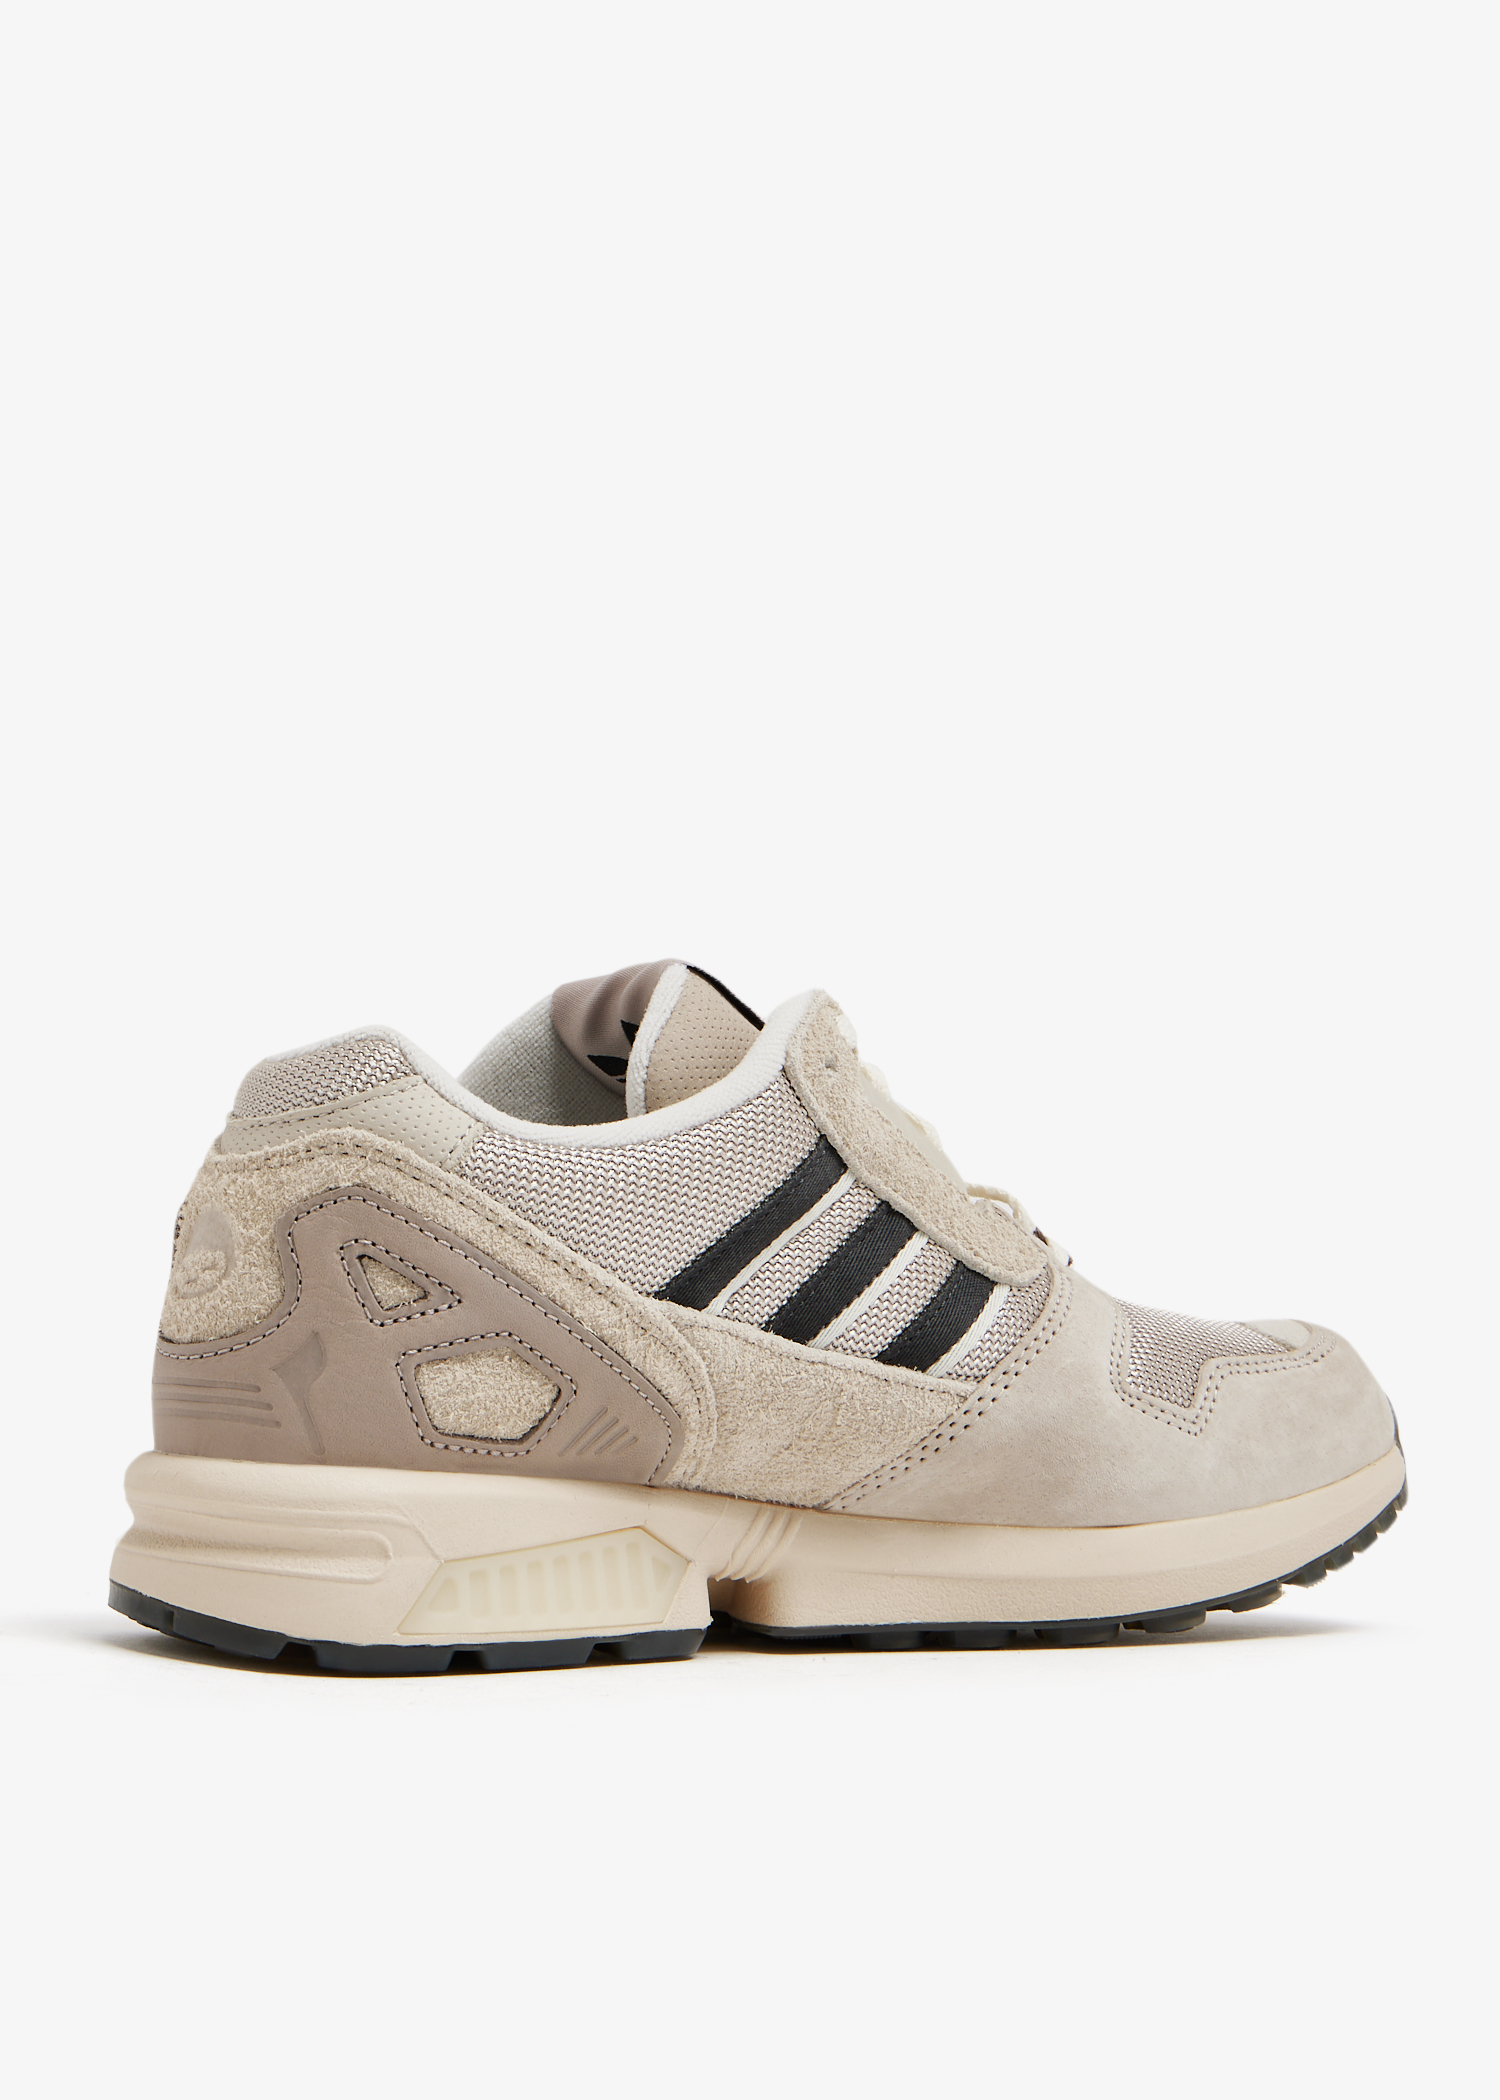 Adidas x OFFSPRING ZX 8000 'Consortium Cup' sneakers for Women 